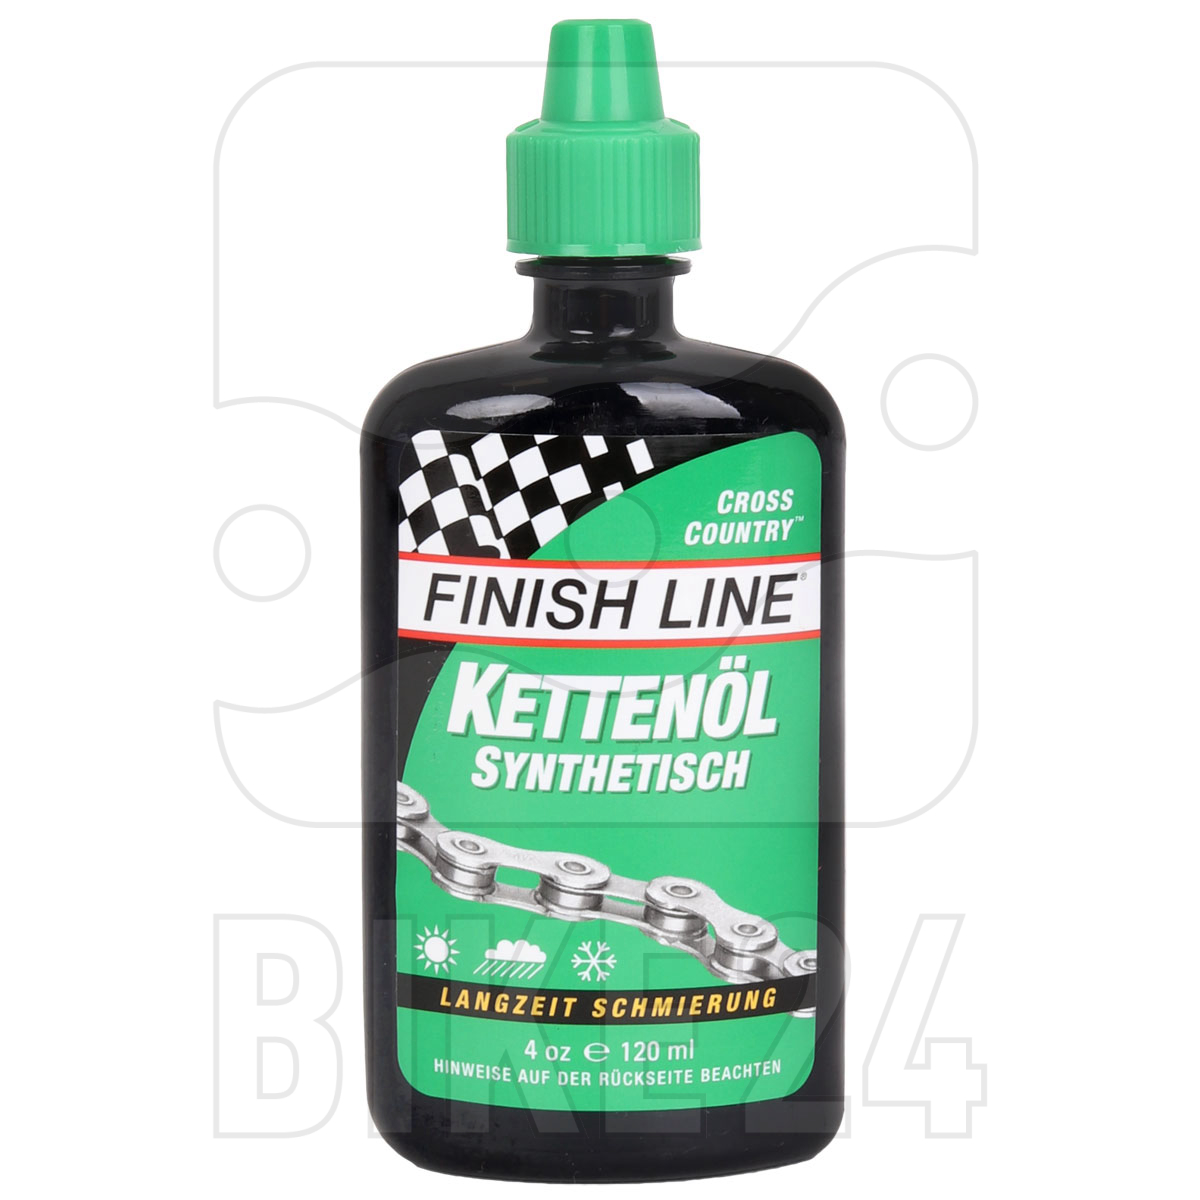 Productfoto van Finish Line Cross Country Chain Lubricant 120ml